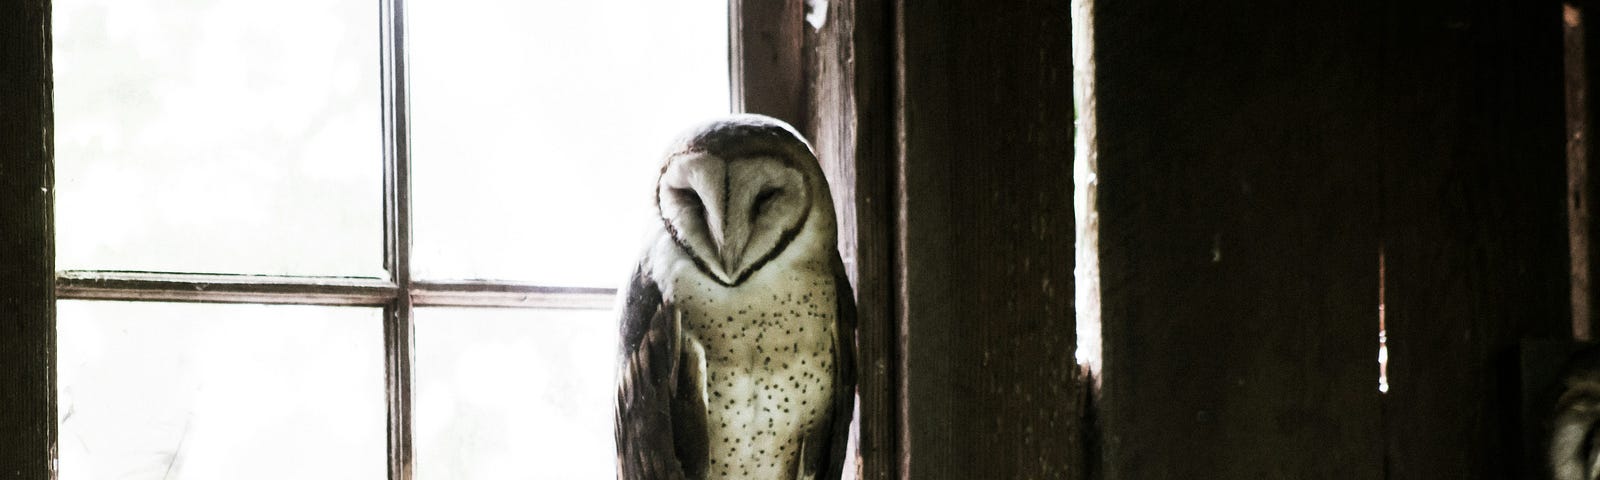 Owl in front of a paned window